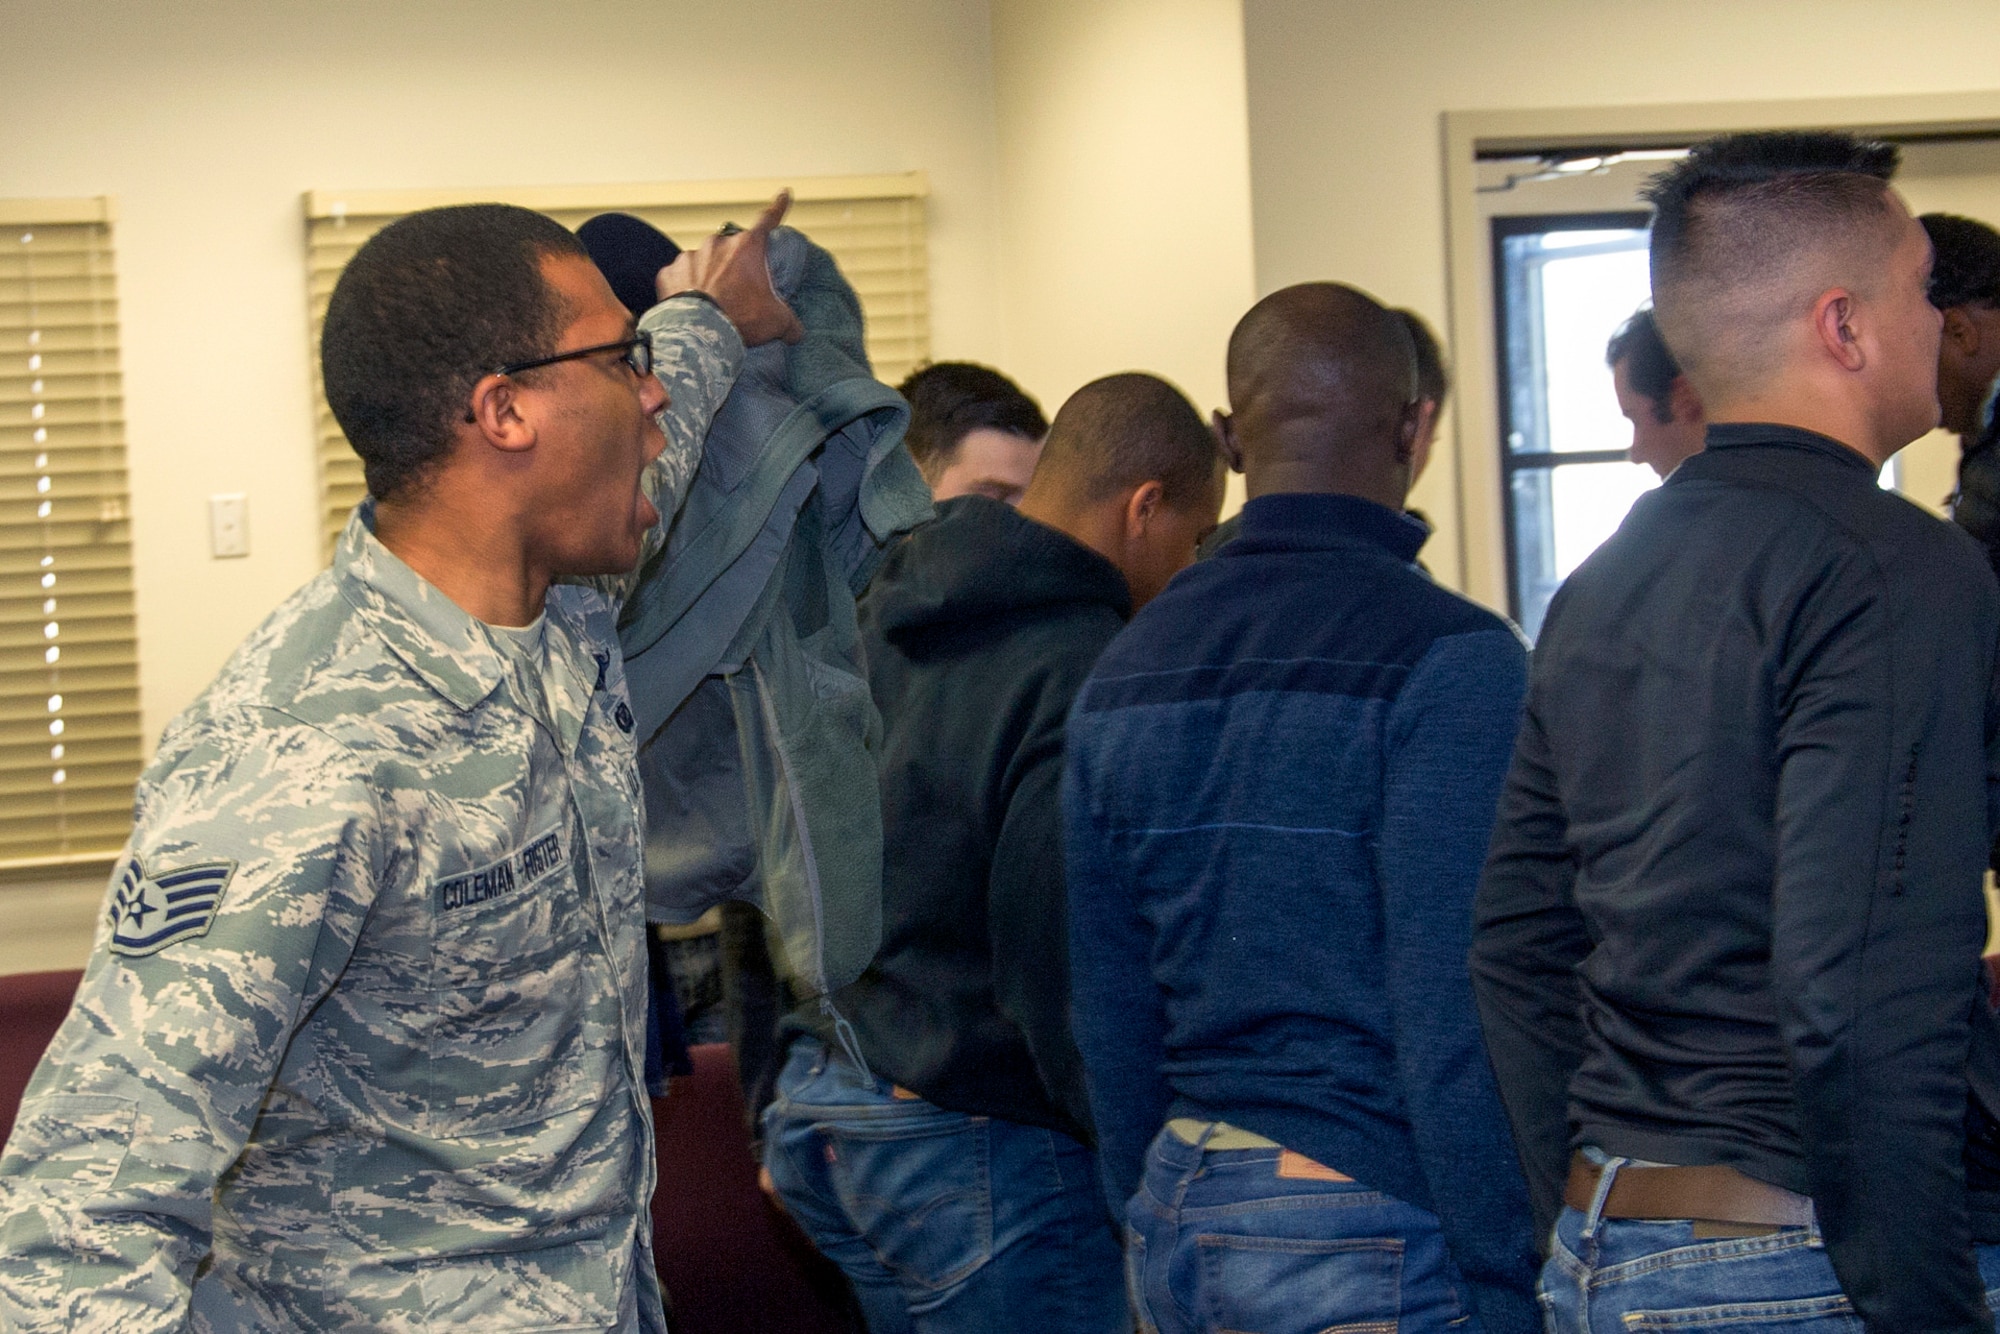 SCHRIEVER AIR FORCE BASE, Colo. -- Former Military Training Instructor, Staff Sgt. Matthew Coleman-Foster, gives Delayed Enlistment Program trainees a look into what they can expect from Basic Military Training Saturday, Jan. 7th, 2017. Staff Sgt. Coleman-Foster assisted in teaching the DEP trainees important drill and ceremony techniques that they will utilize in Basic Military Training. (U.S. Air Force photo/Staff Sgt. Christopher Moore)